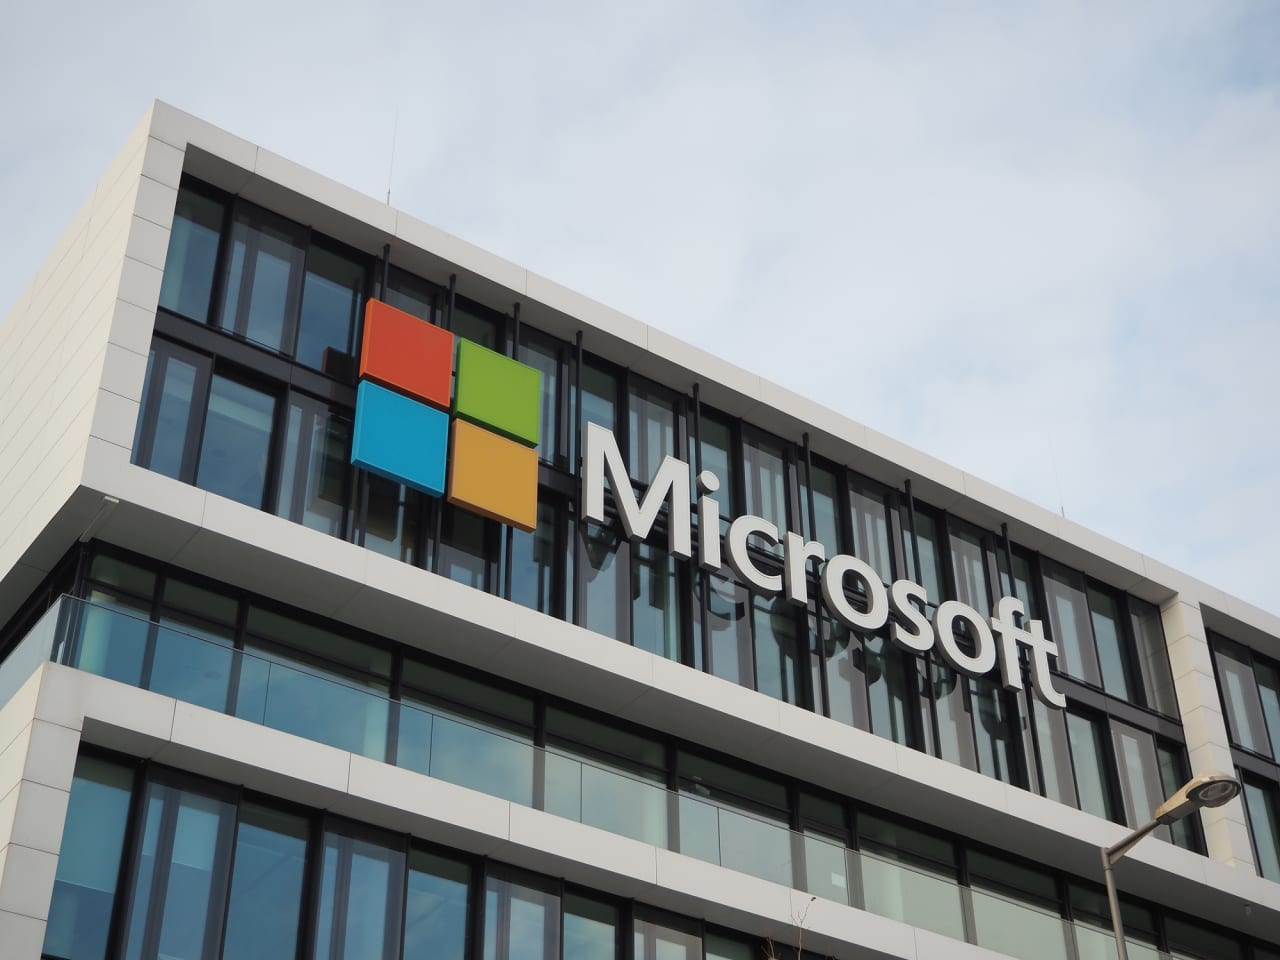 Microsoft’s cloud growth disappointed. Now here’s the good news from earnings.